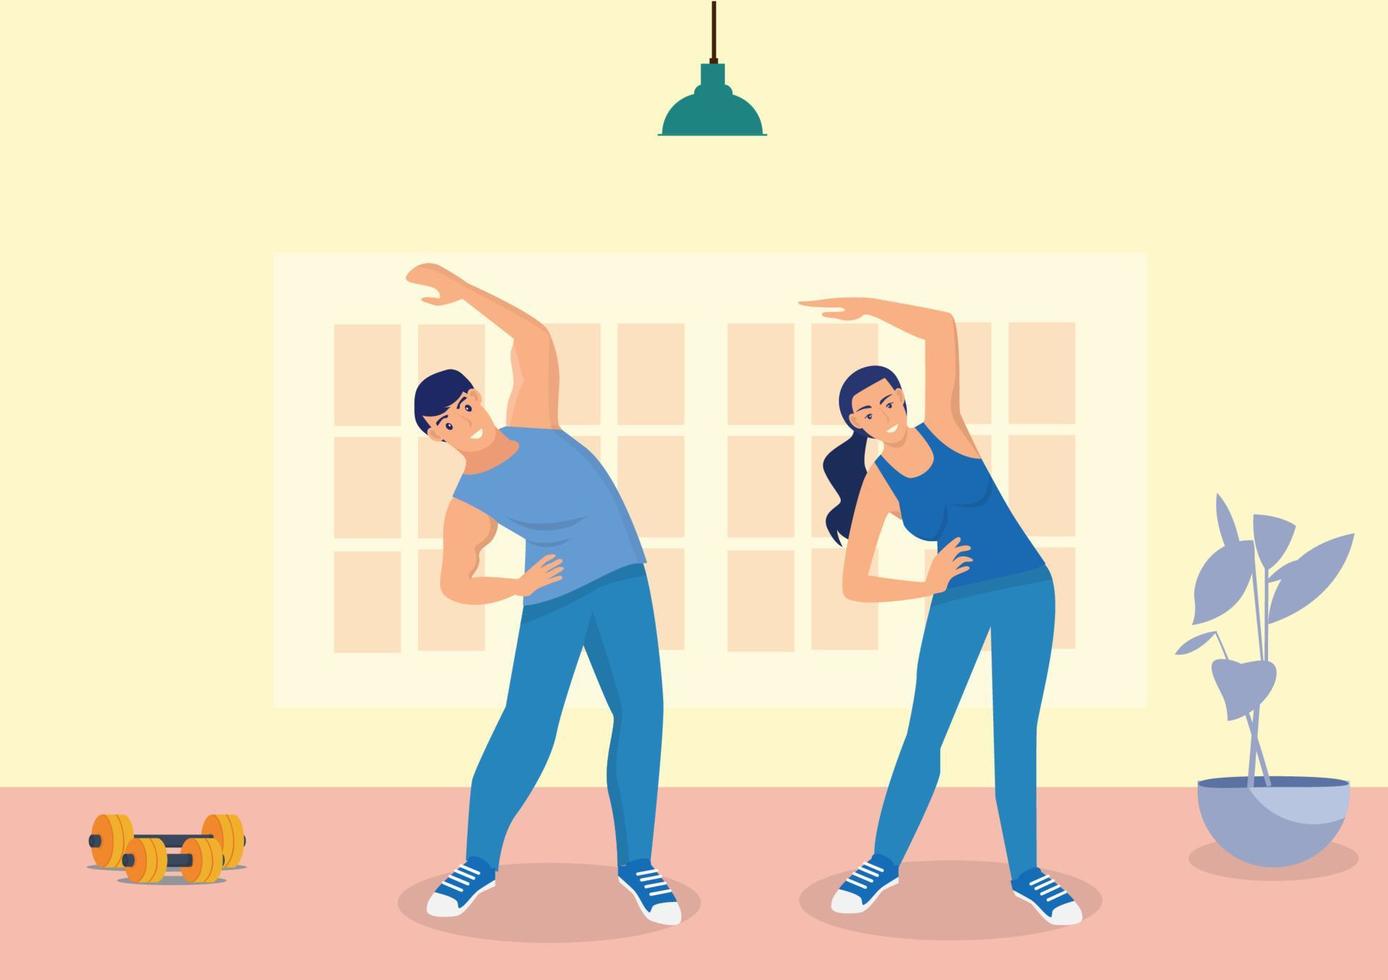 Husband and wife enjoy doing exercise at home healthy lifestyle vector illustration in flat style